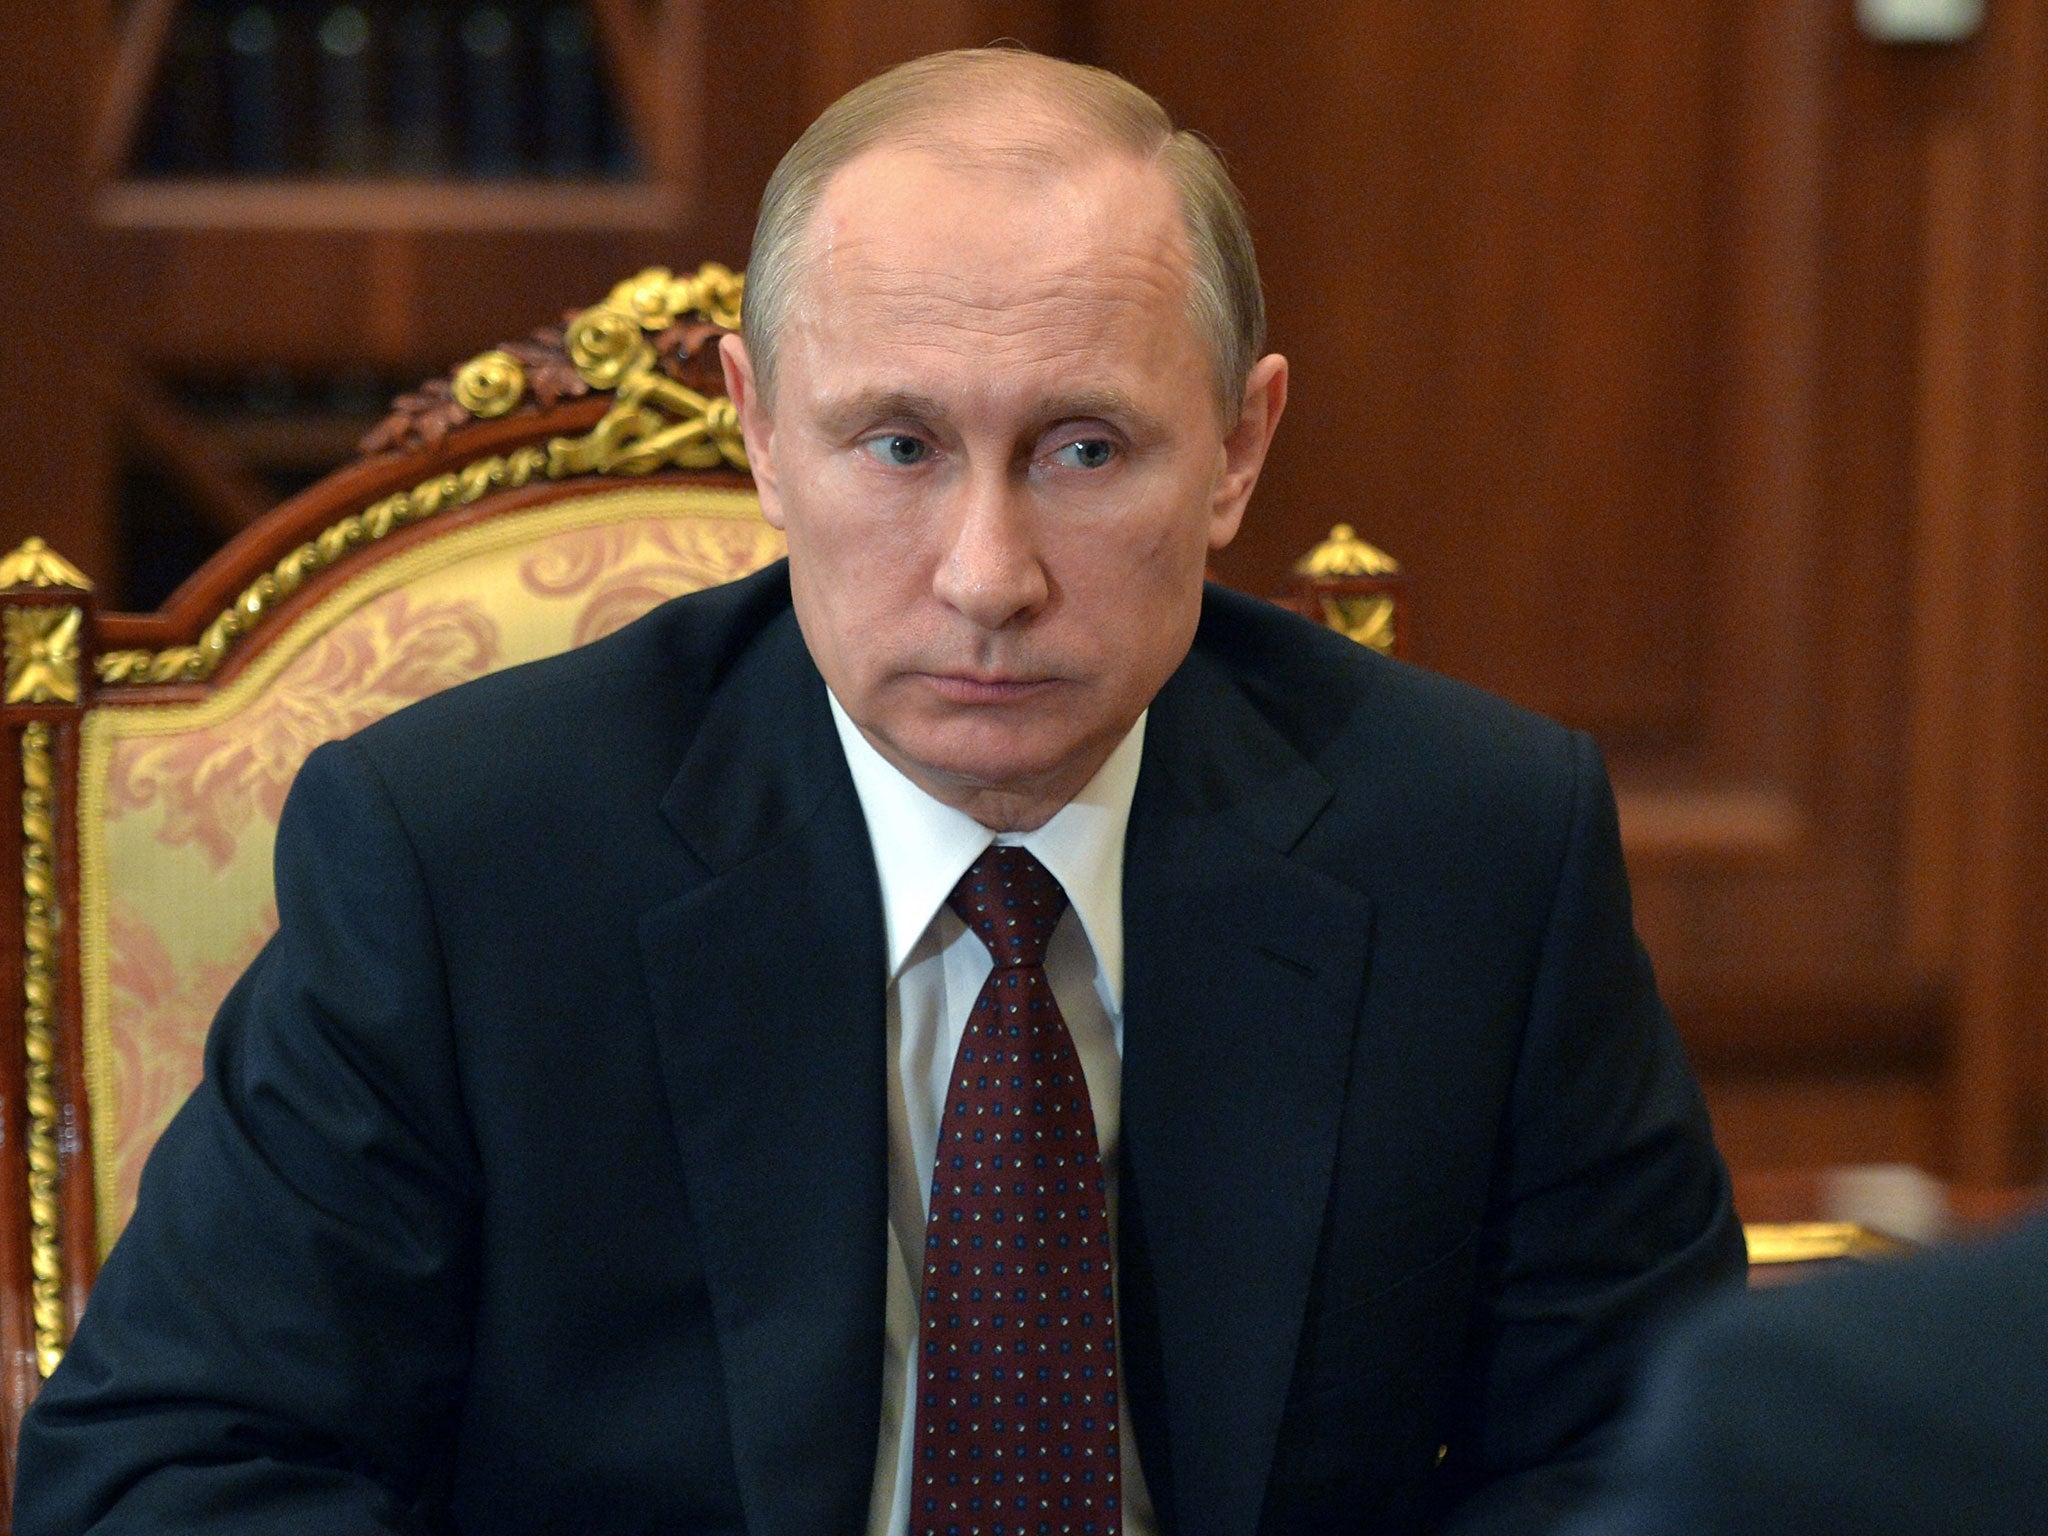 Russian President Vladimir Putin listens during a meeting at the Kremlin, in Moscow